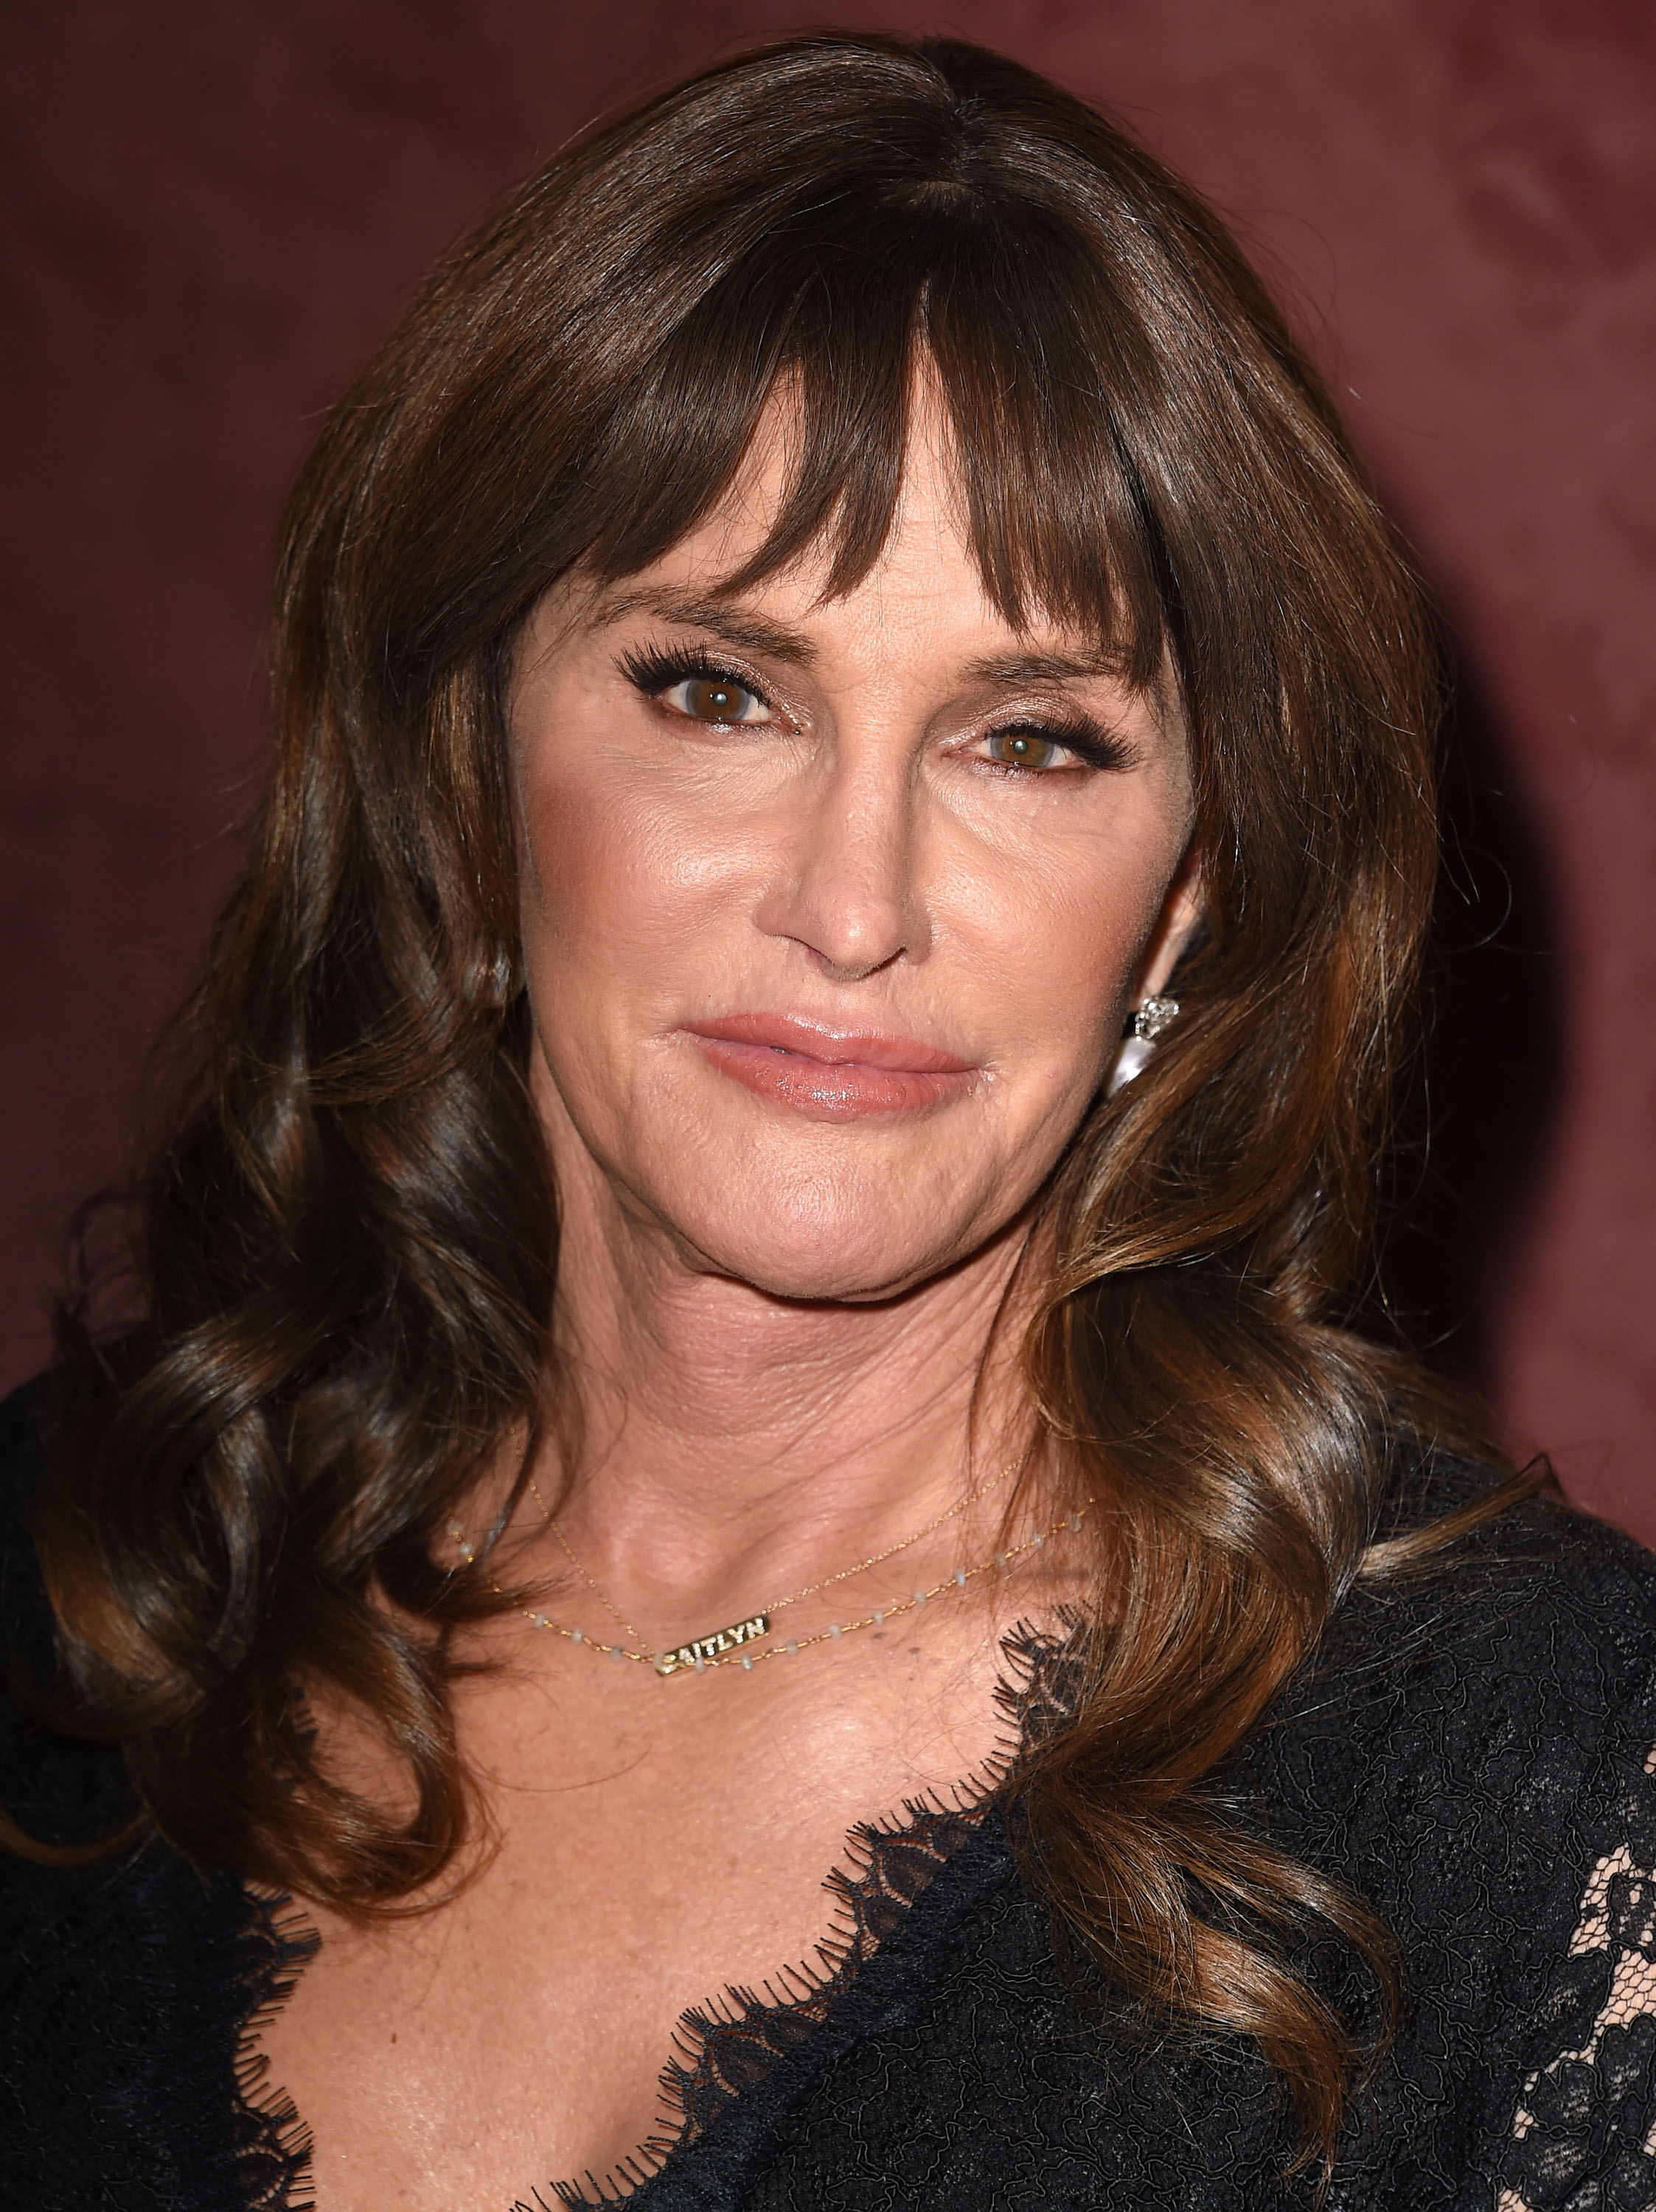 Caitlyn Jenner at a Special Screening Of "Tangerine" on Jan. 4, 2016 in Los Angeles.